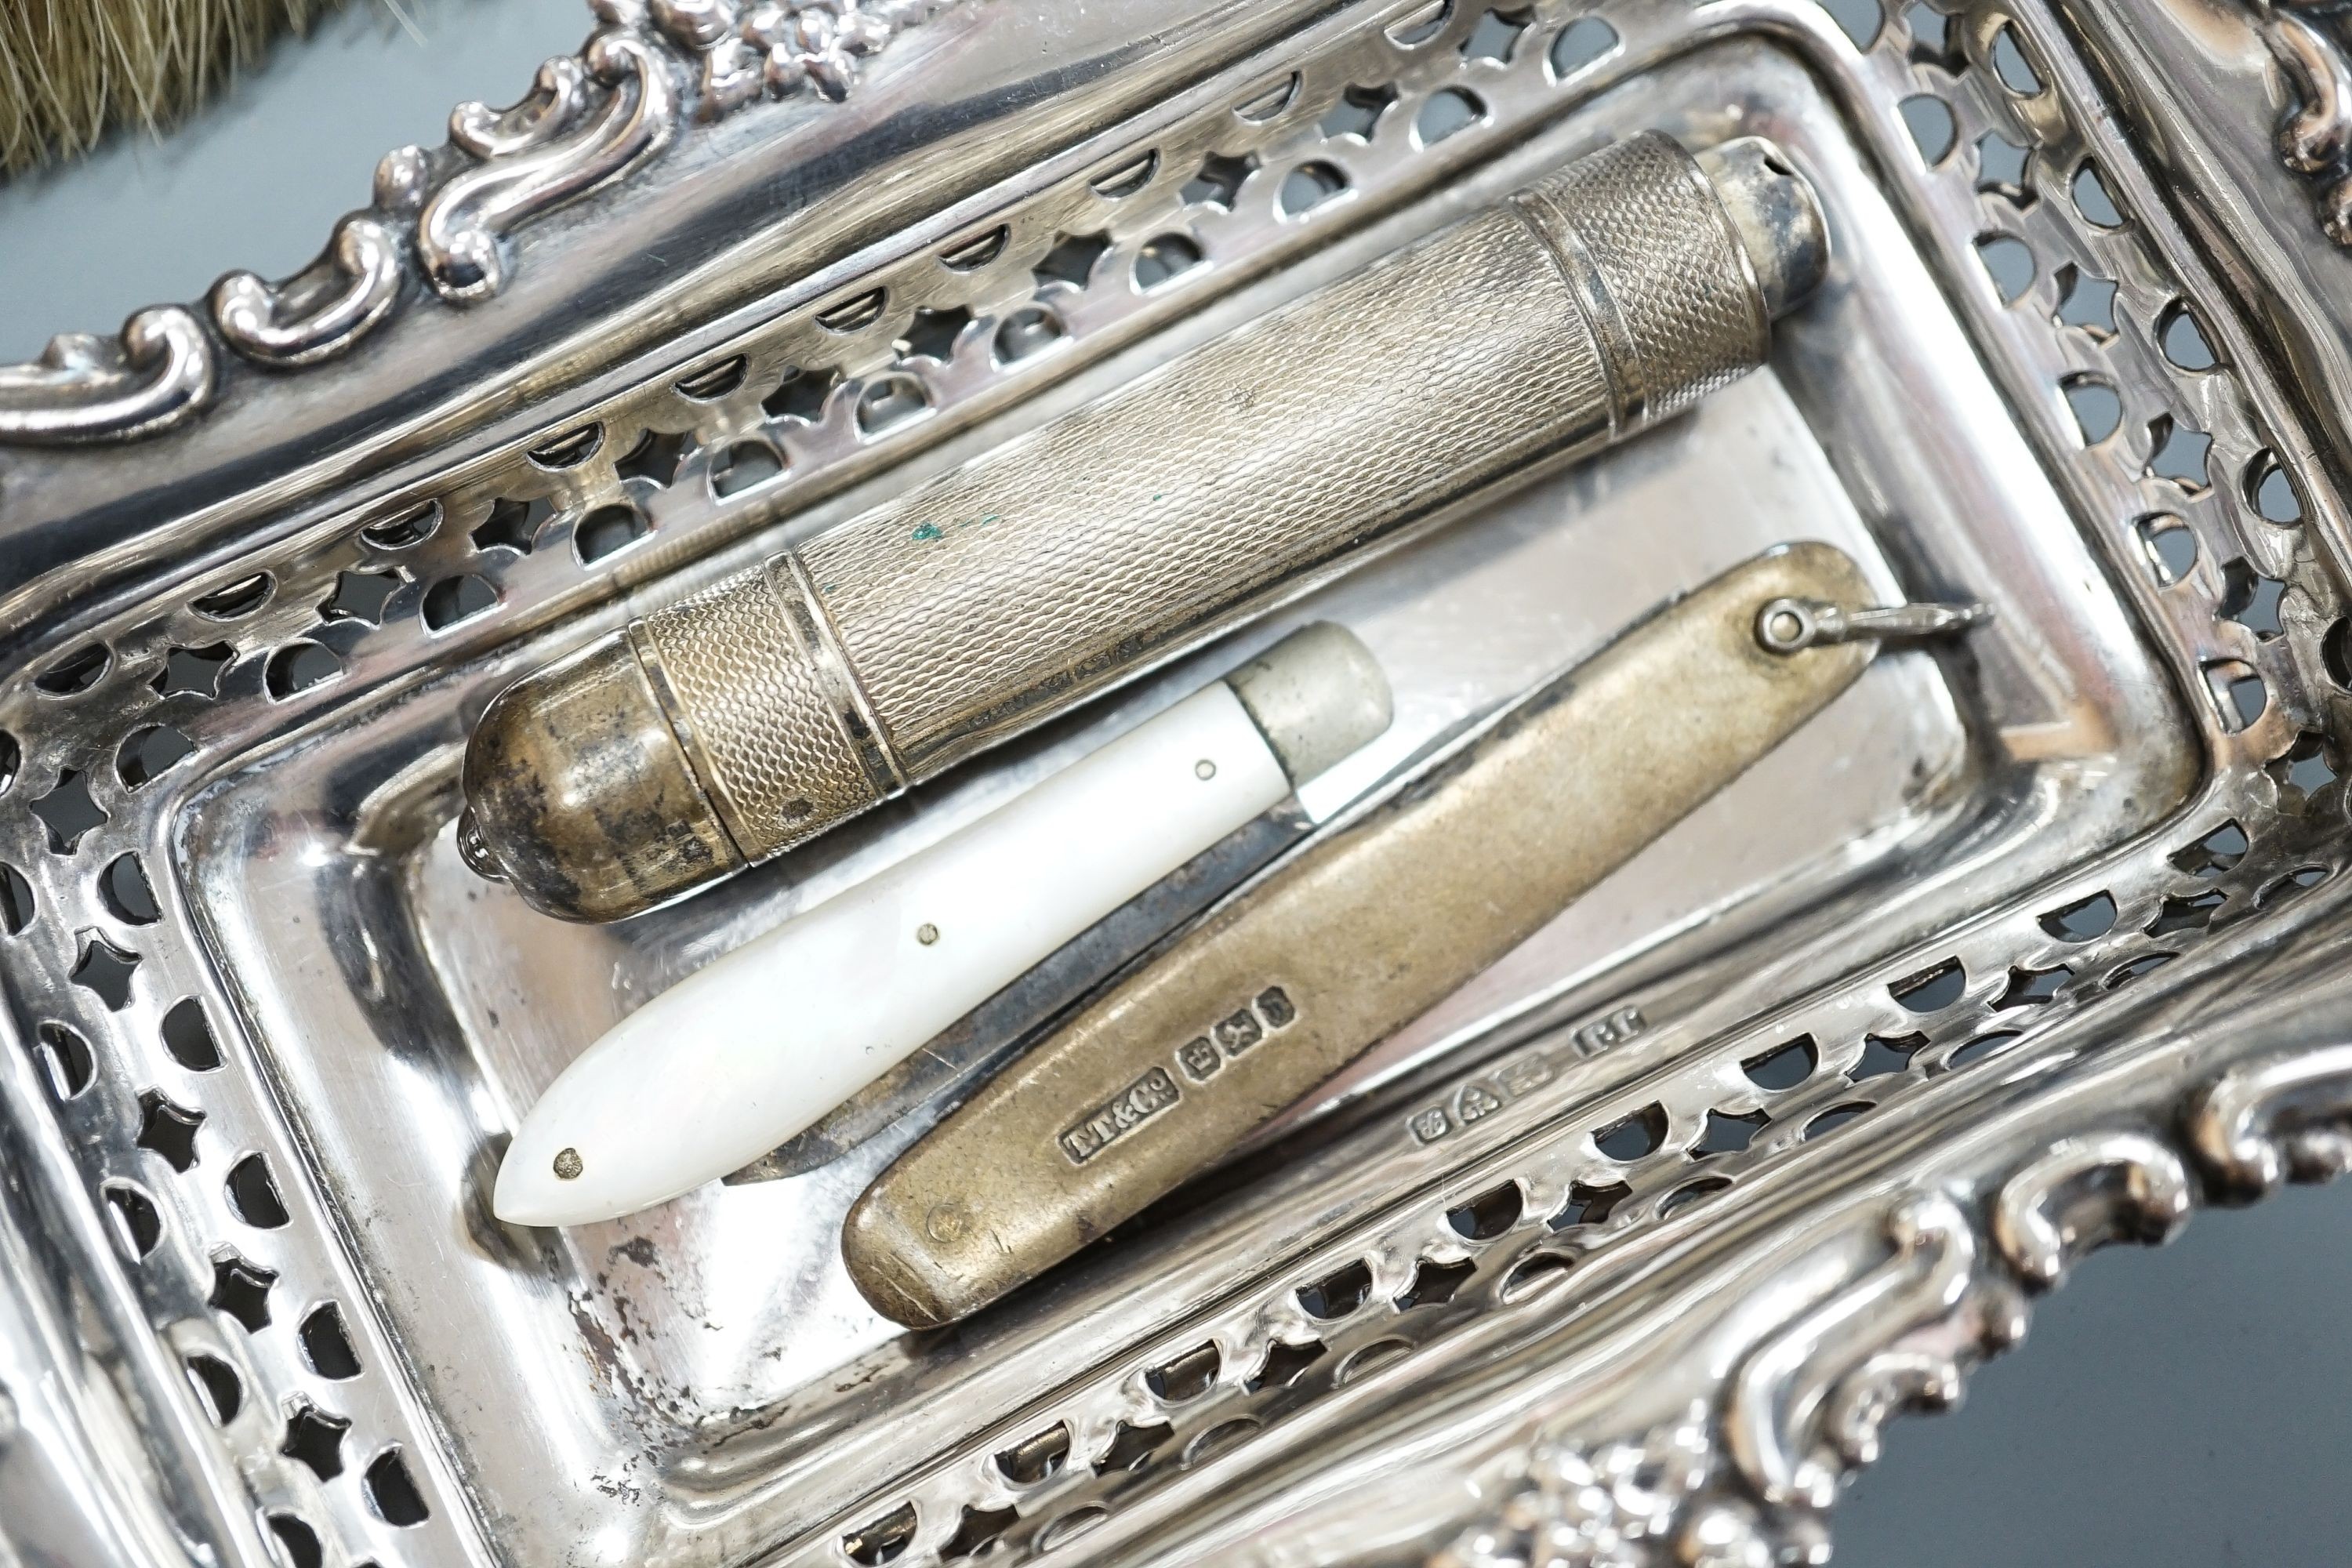 A pair of Edwardian pierced silver bonbon dishes, Chester, 1902, 16.1cm, 4.5oz, a silver and - Image 2 of 4